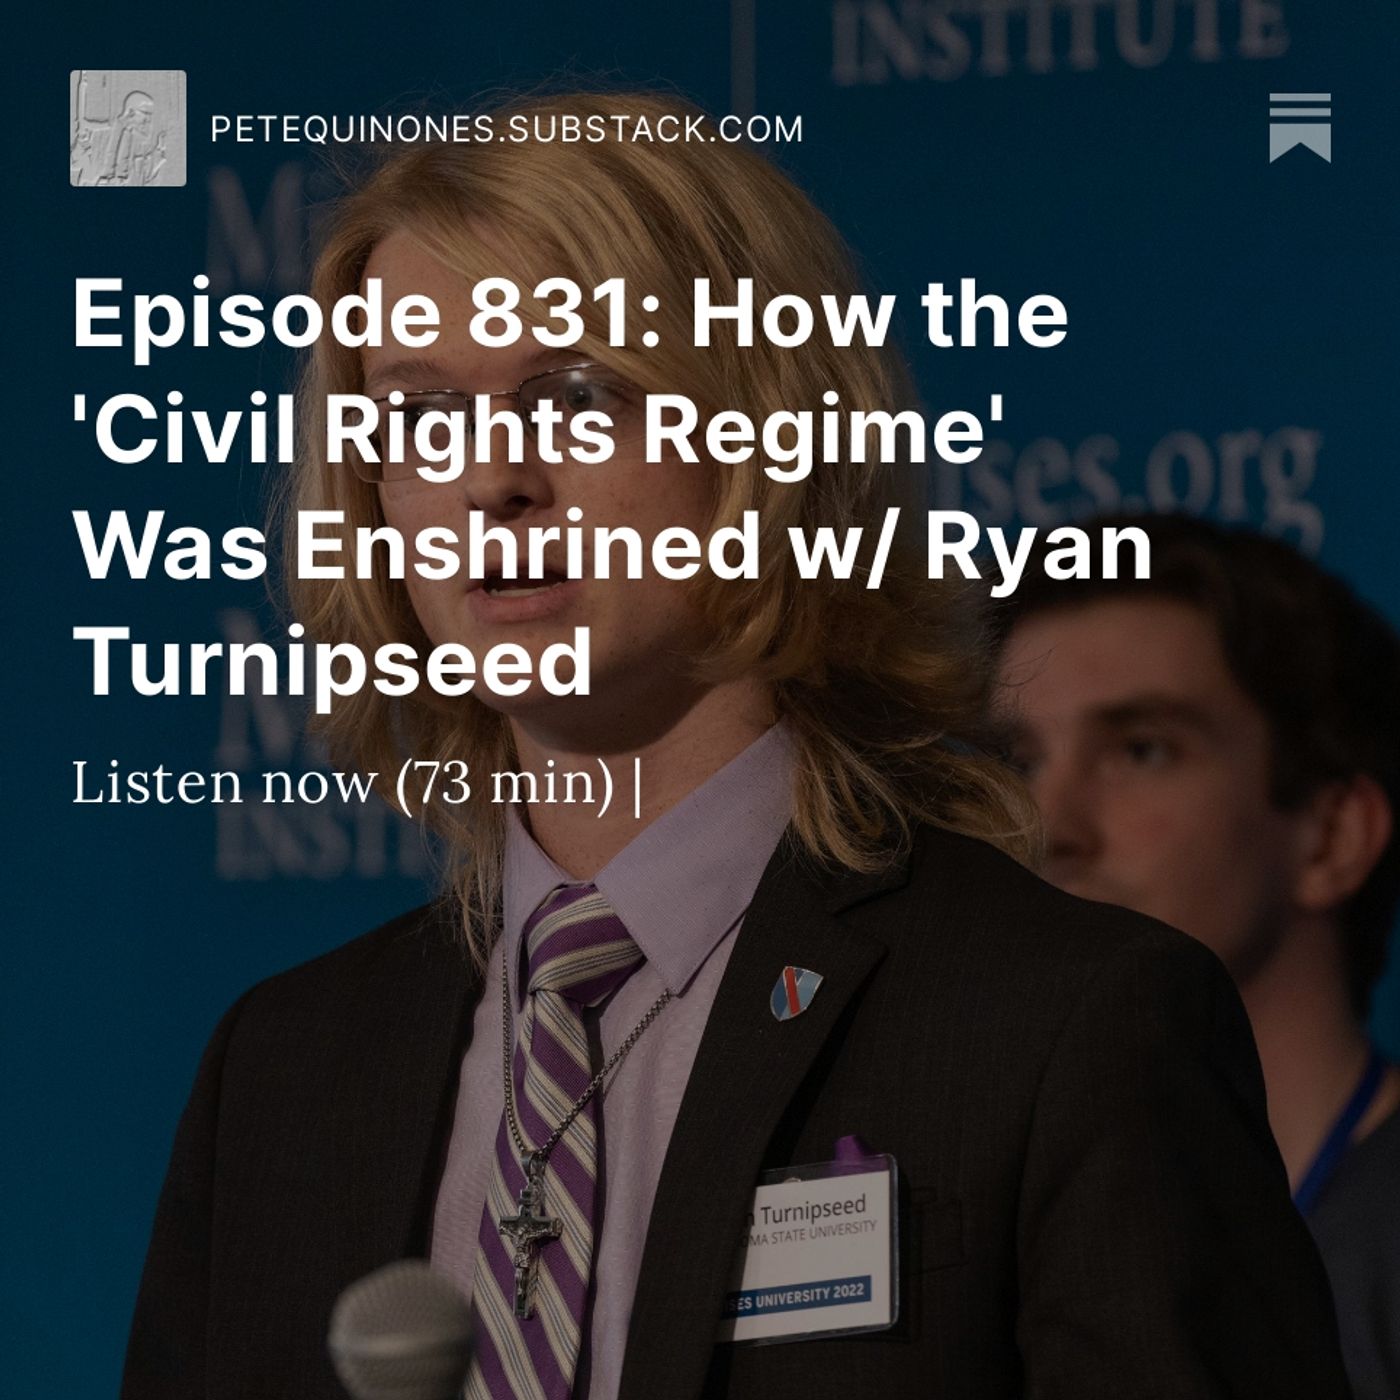 Episode 831: How the 'Civil Rights Regime' Was Enshrined w/ Ryan Turnipseed